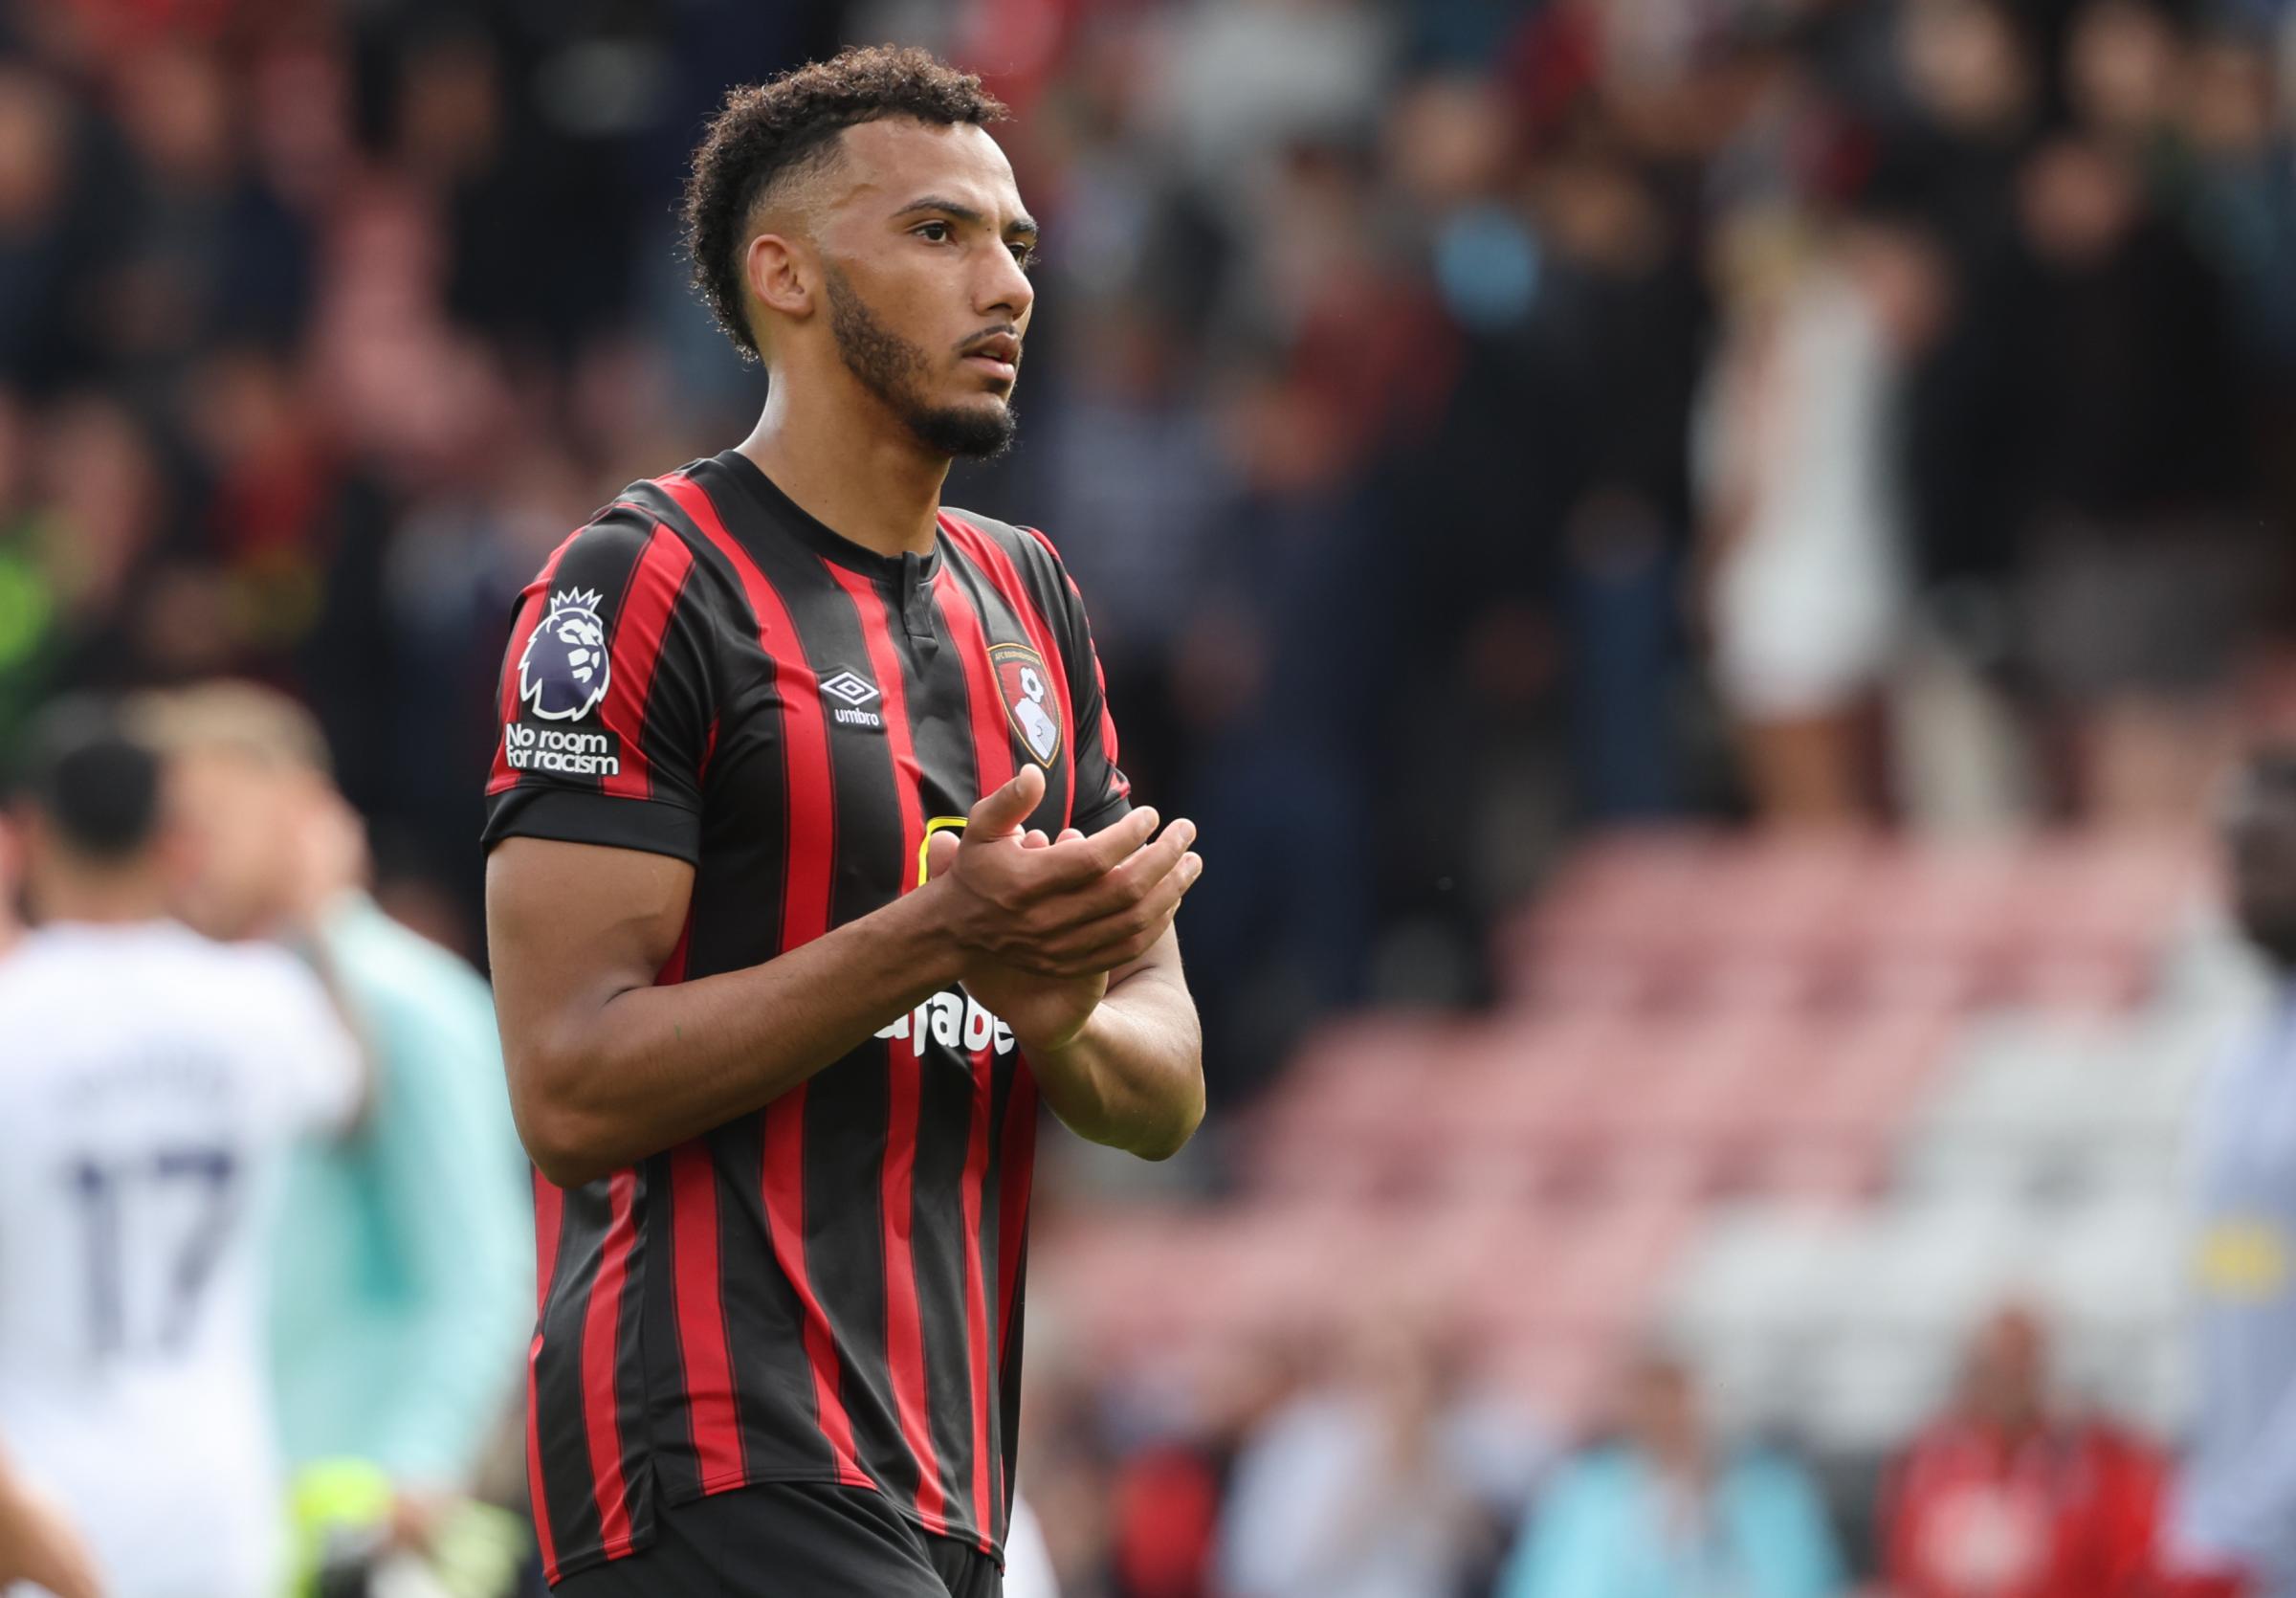 Lloyd Kelly announces departure from AFC Bournemouth